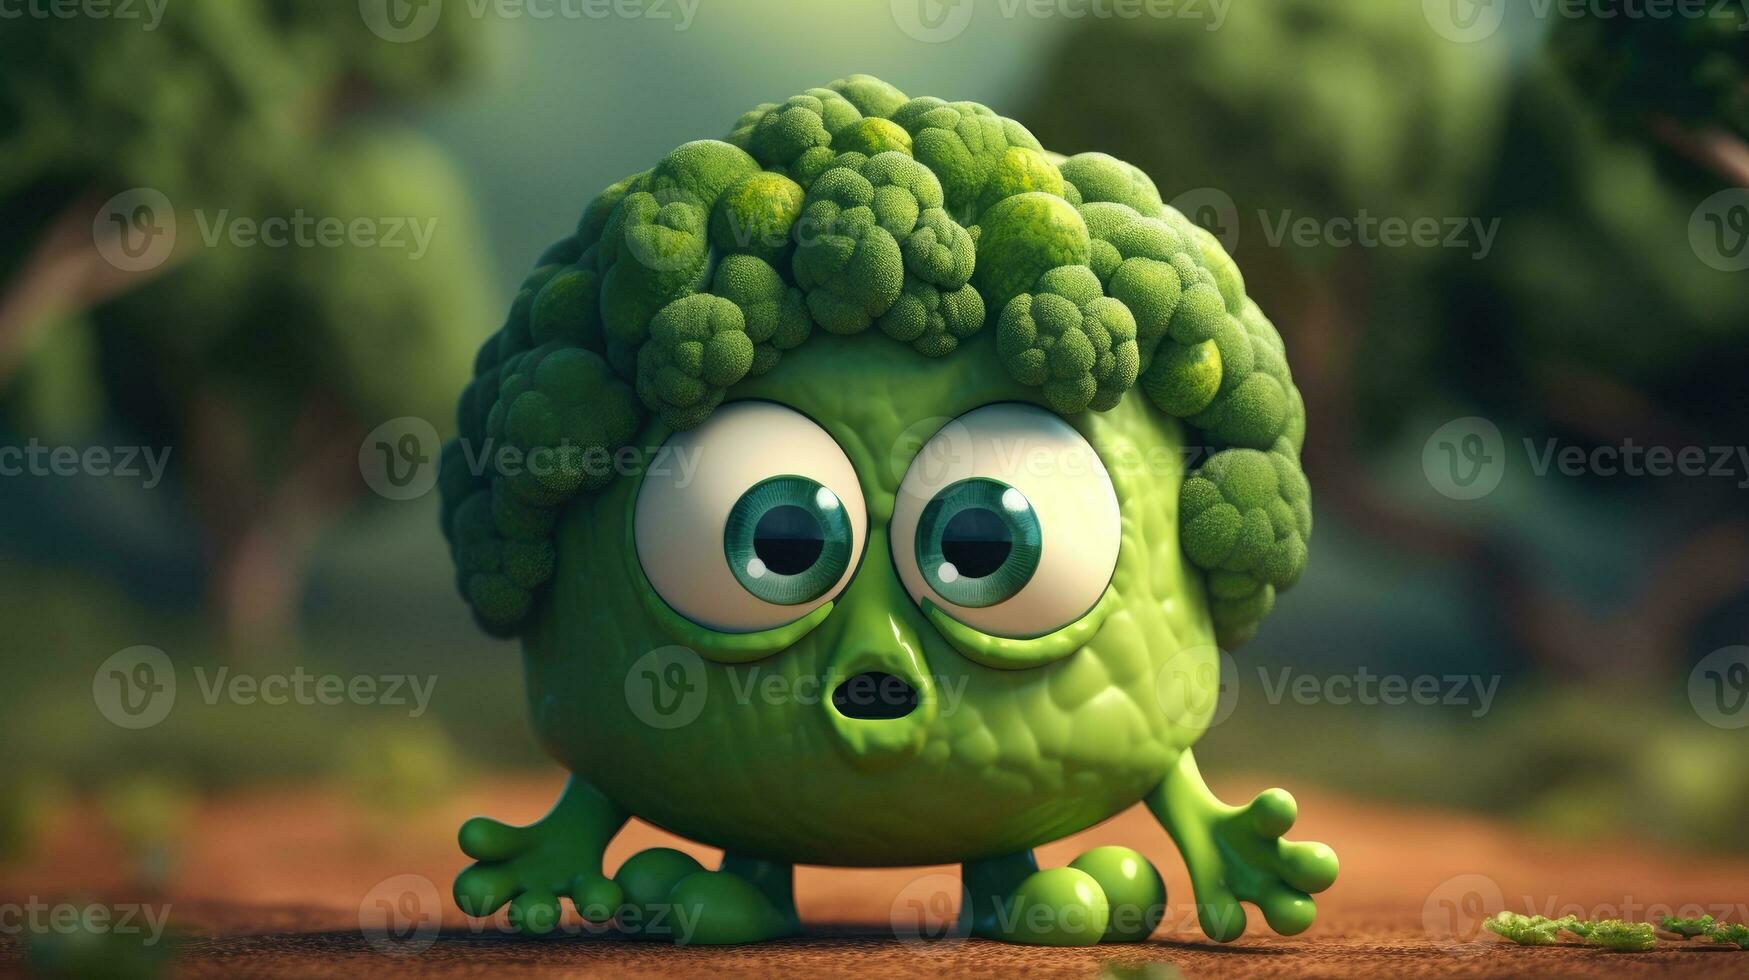 Adorable Broccoli Cartoon Character with Expressive Eyes photo